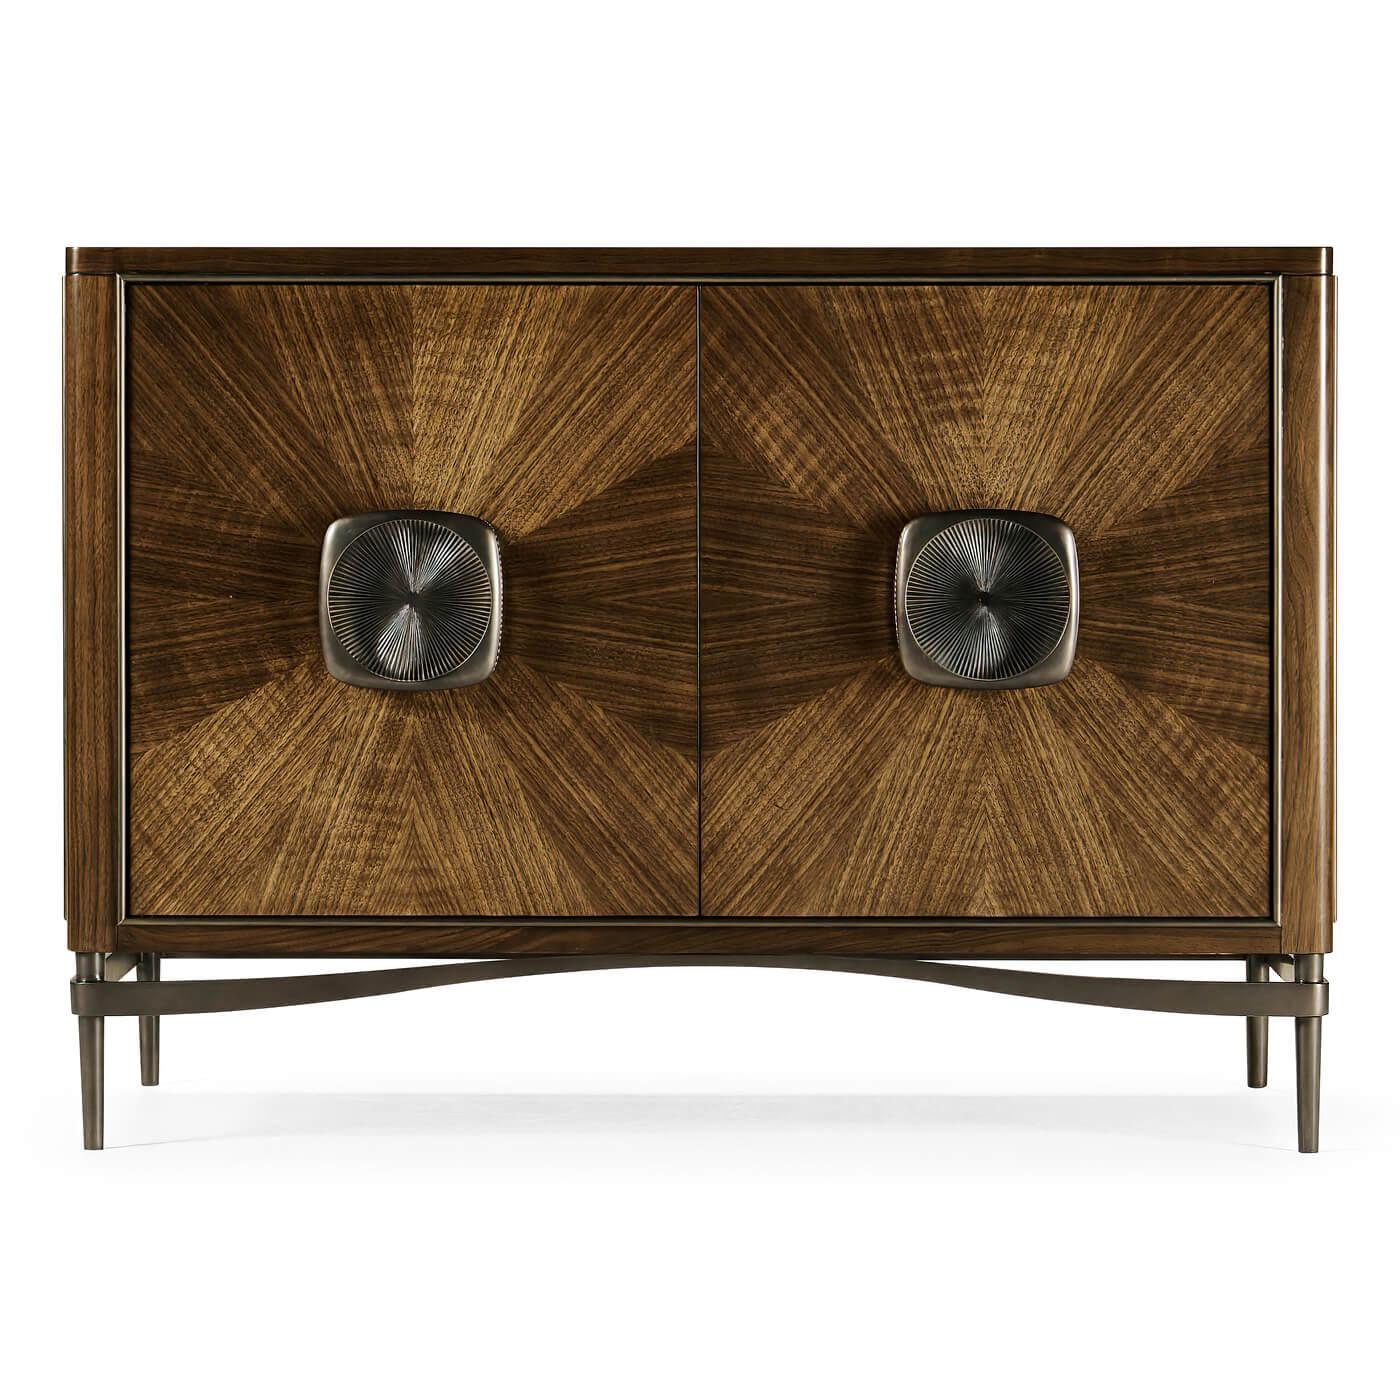 A French modern walnut cabinet. Constructed from walnut with a transparent lacquer finish. The doors feature walnut veneer in a pattern reminiscent of sun rays or straw work. The custom cast hardware is acid dipped and hand-rubbed to achieve a rich,